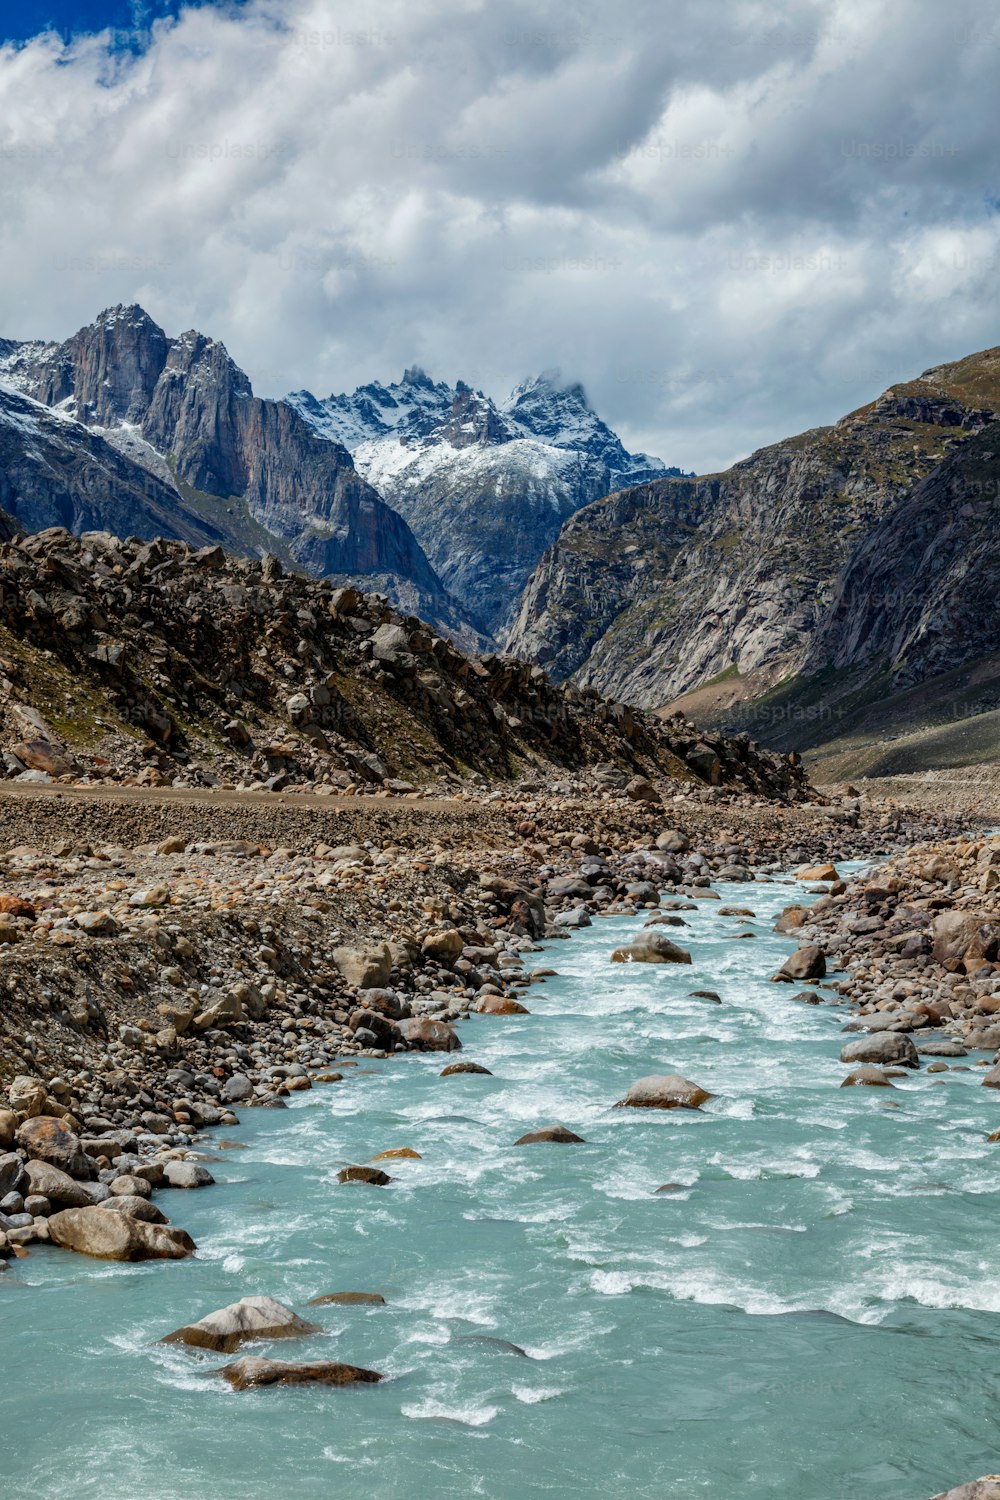 Chandra river in Lahaul Valley in indian Himalayas. Himachal Pradesh, India India